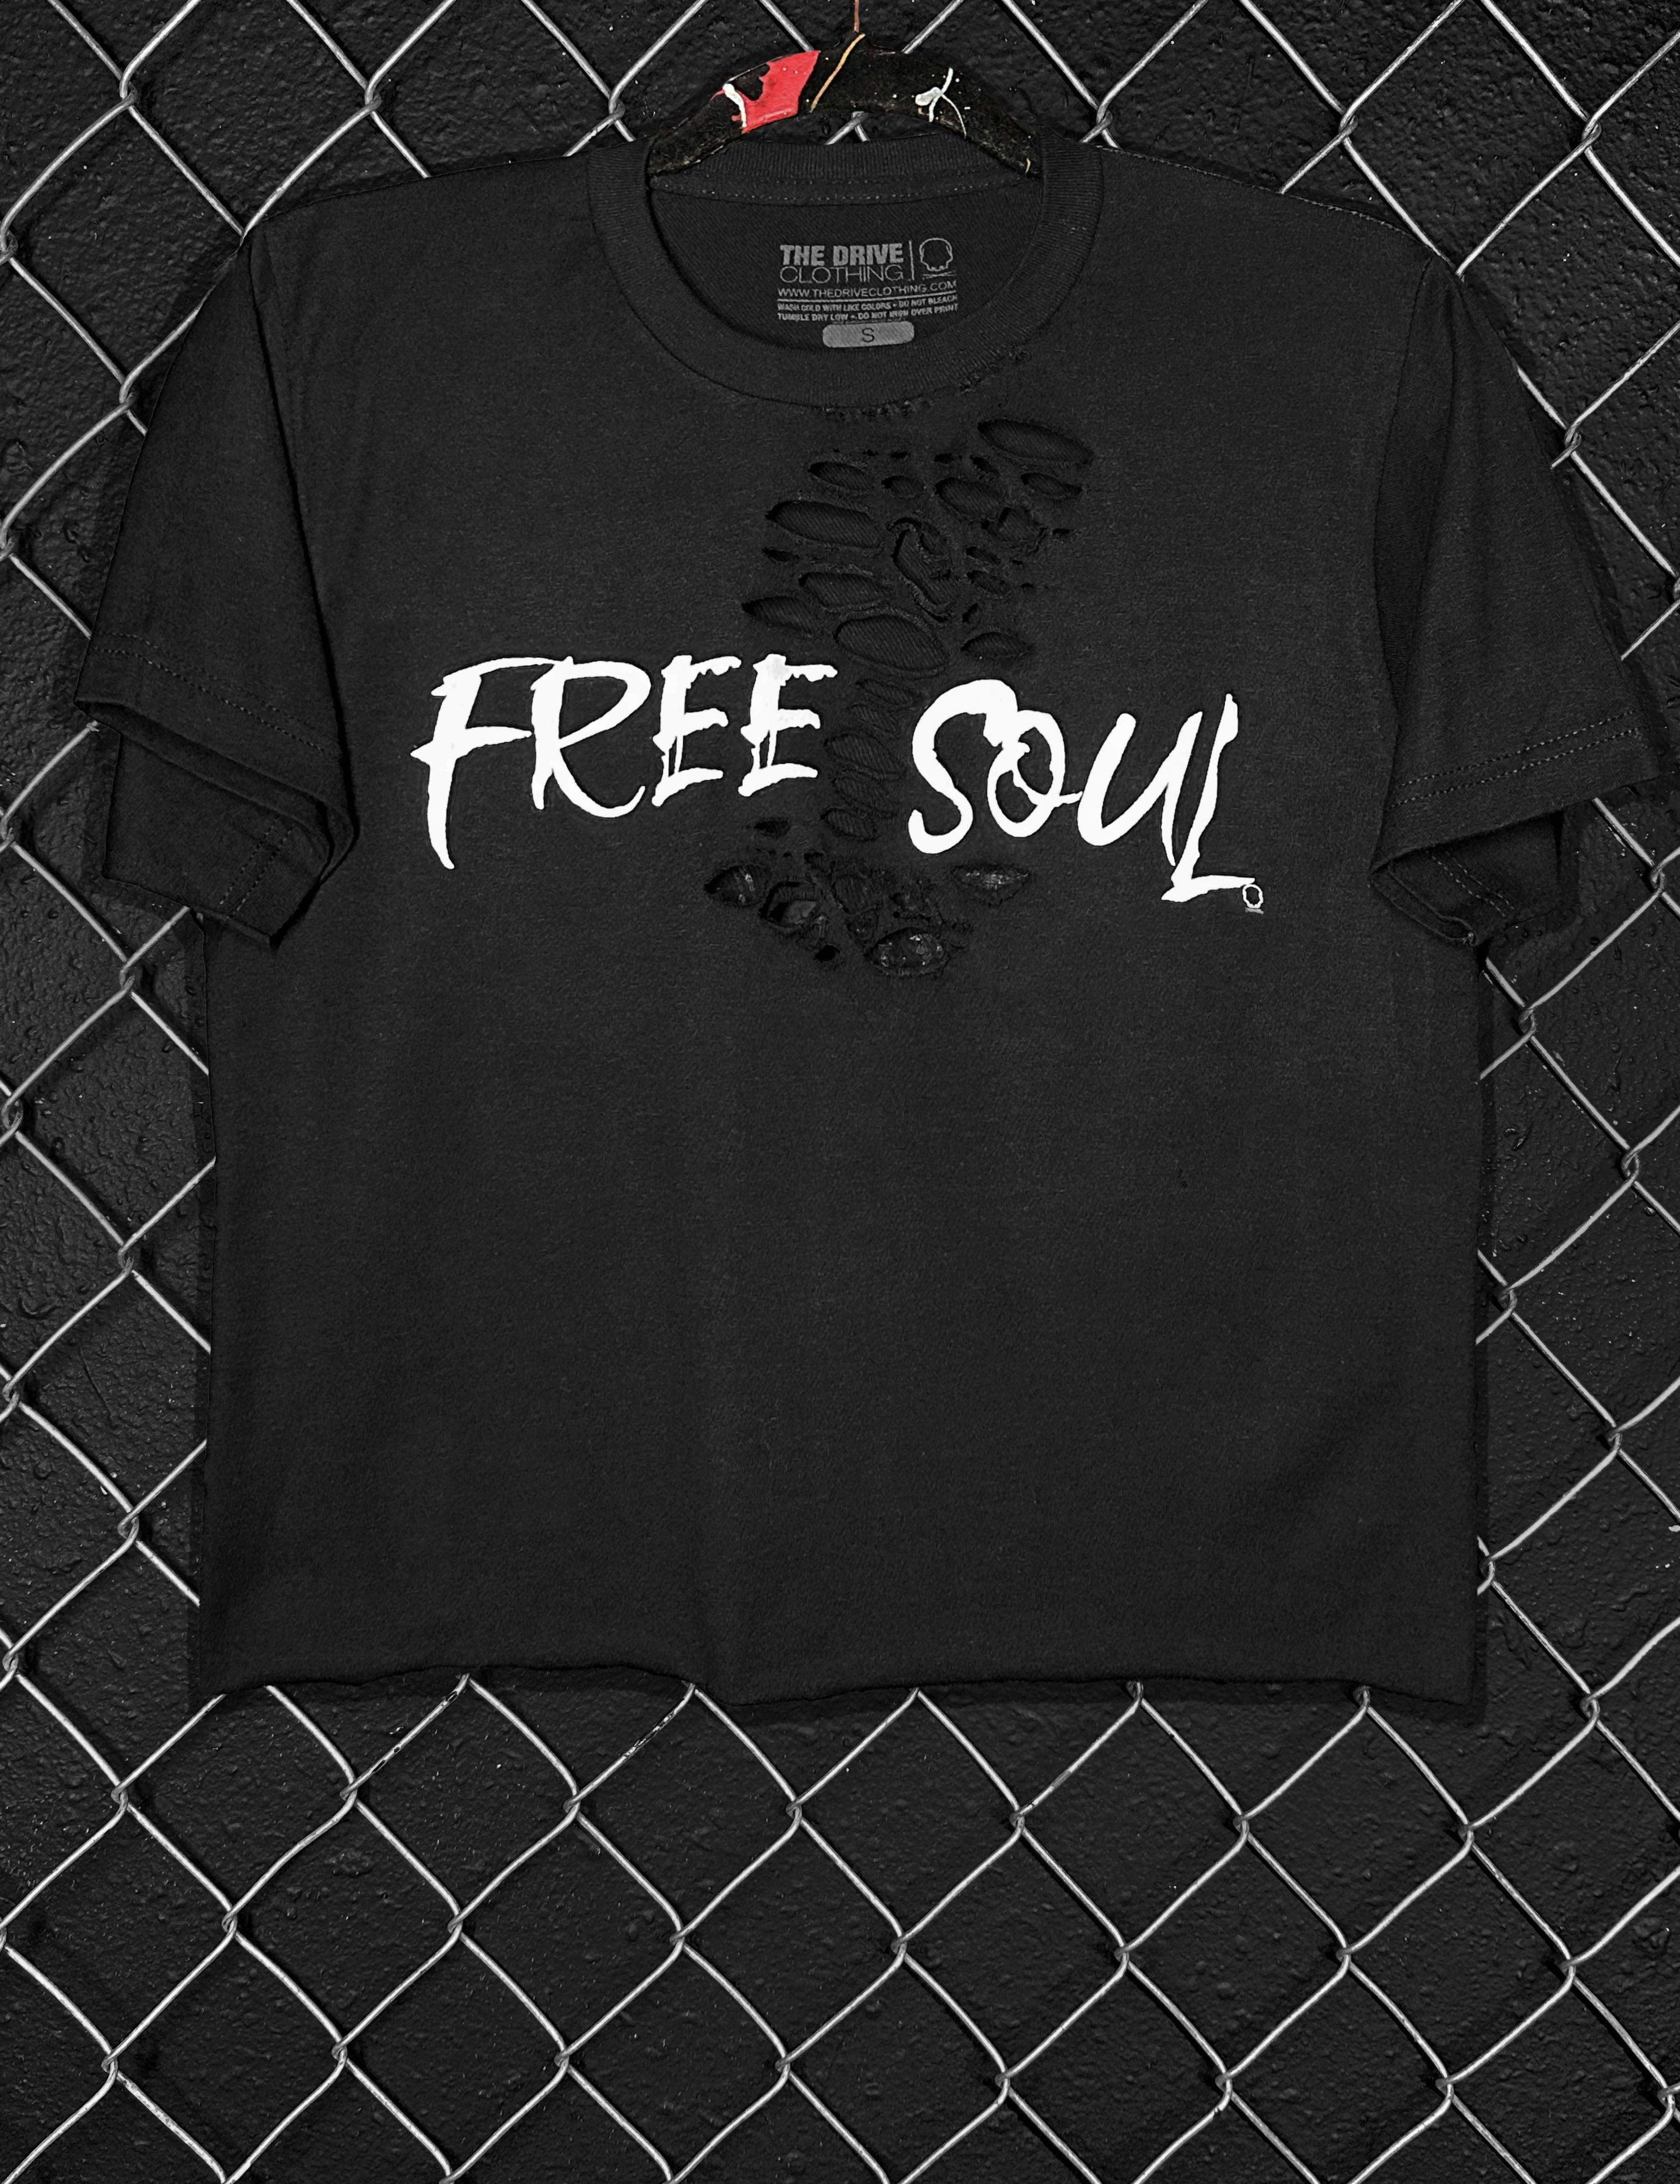 FREE SOUL CROP TOP - The Drive Clothing